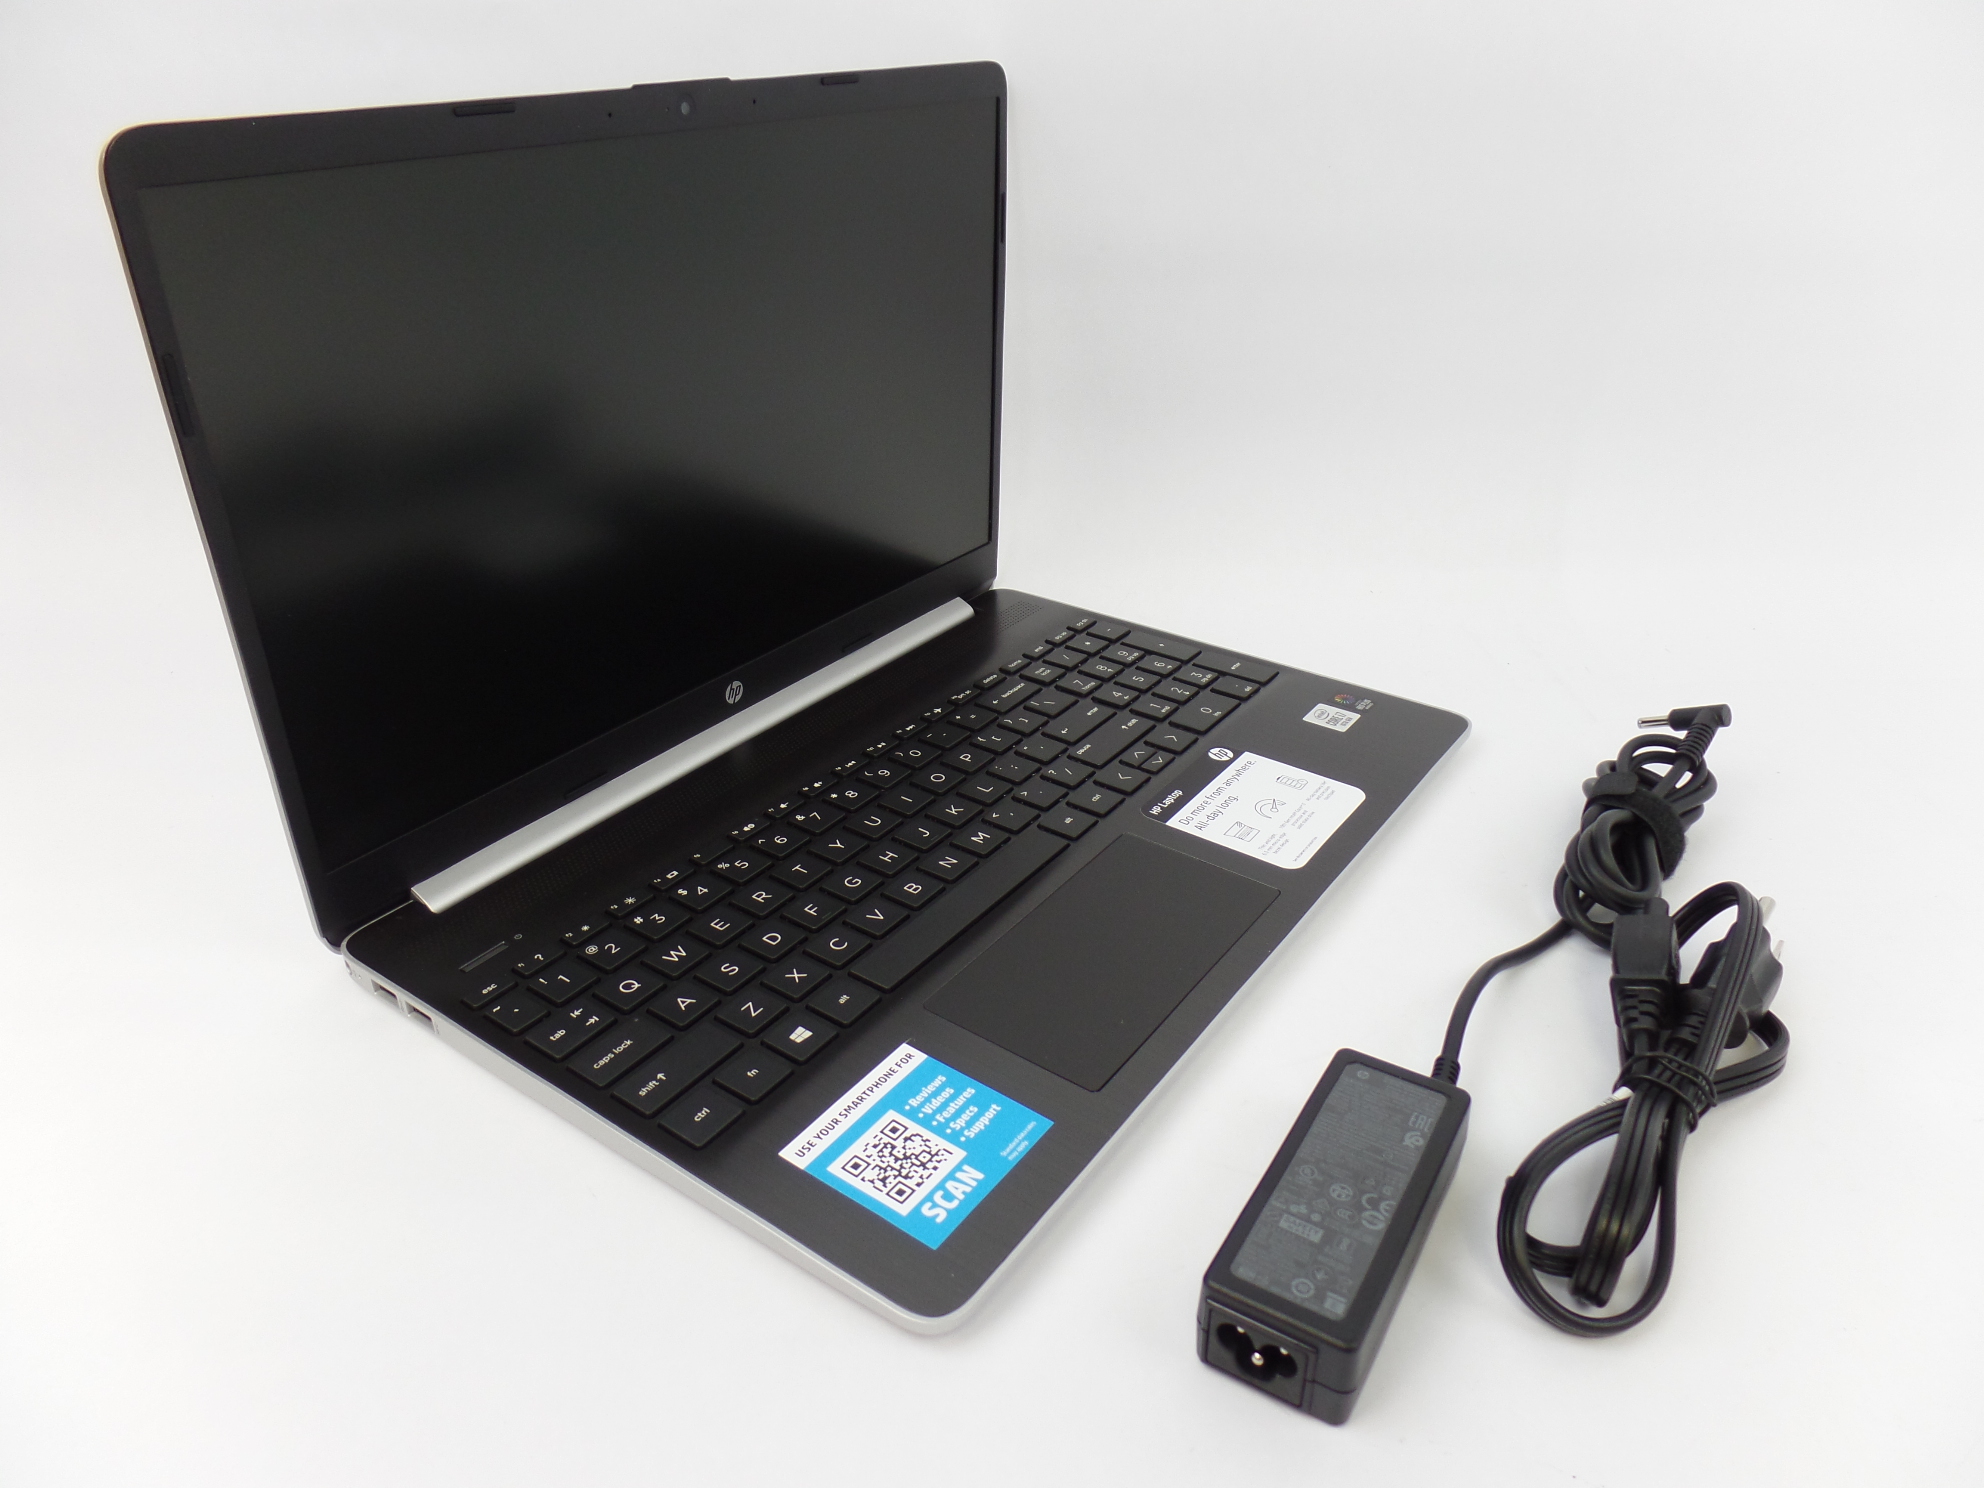 Used (good working condition) HP 15-dy1078nr 15.6" HD i7-1065G7 1.3GHz 8GB 256GB SSD Iris Plus W10H Laptop SD - image 1 of 6